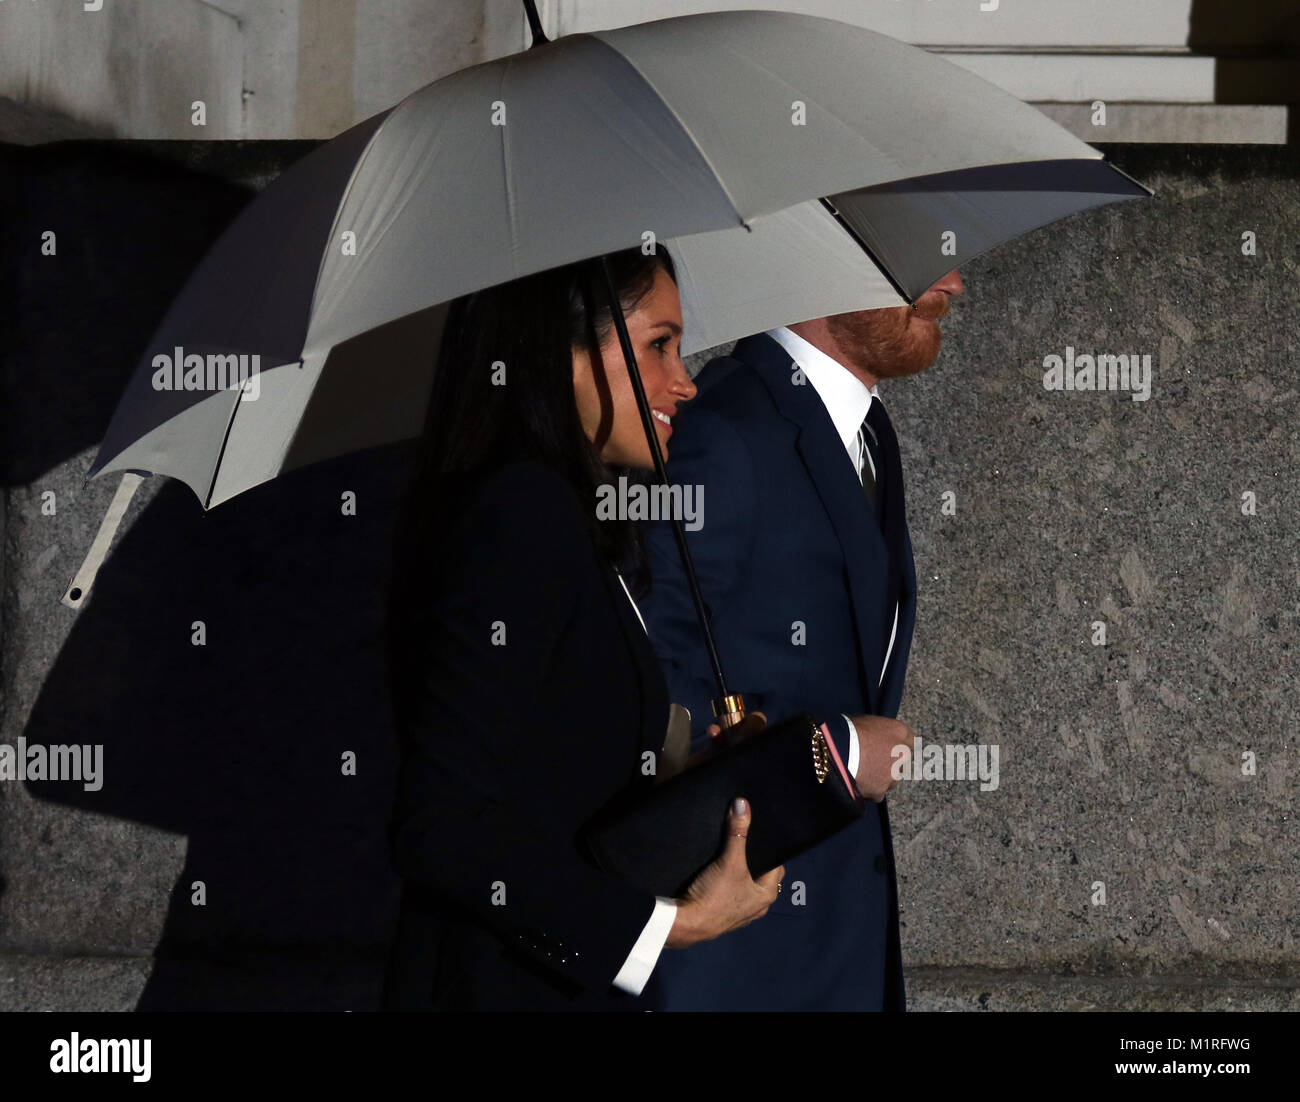 London, UK. February 1, 2018.  Meghan Markle and HRH Prince Harry (of Wales) attending the Endeavour Fund Awards at Goldsmiths' Hall, London  on February 1, 2018 Credit: Paul Marriott/Alamy Live News Stock Photo